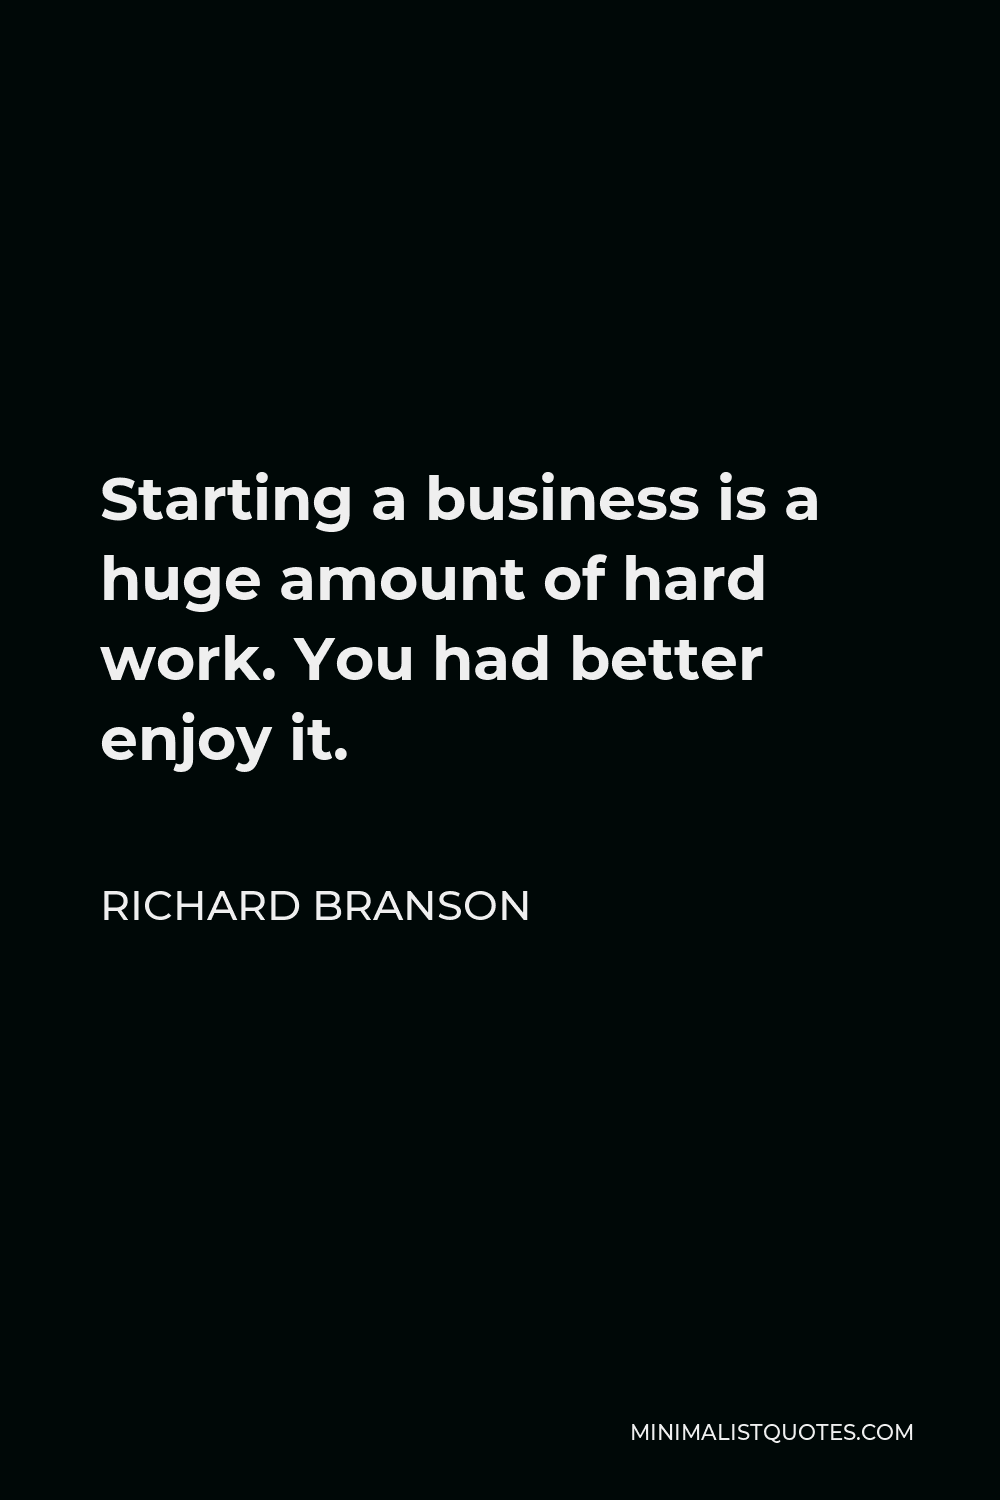 Richard Branson Quote - Starting a business is a huge amount of hard work. You had better enjoy it.